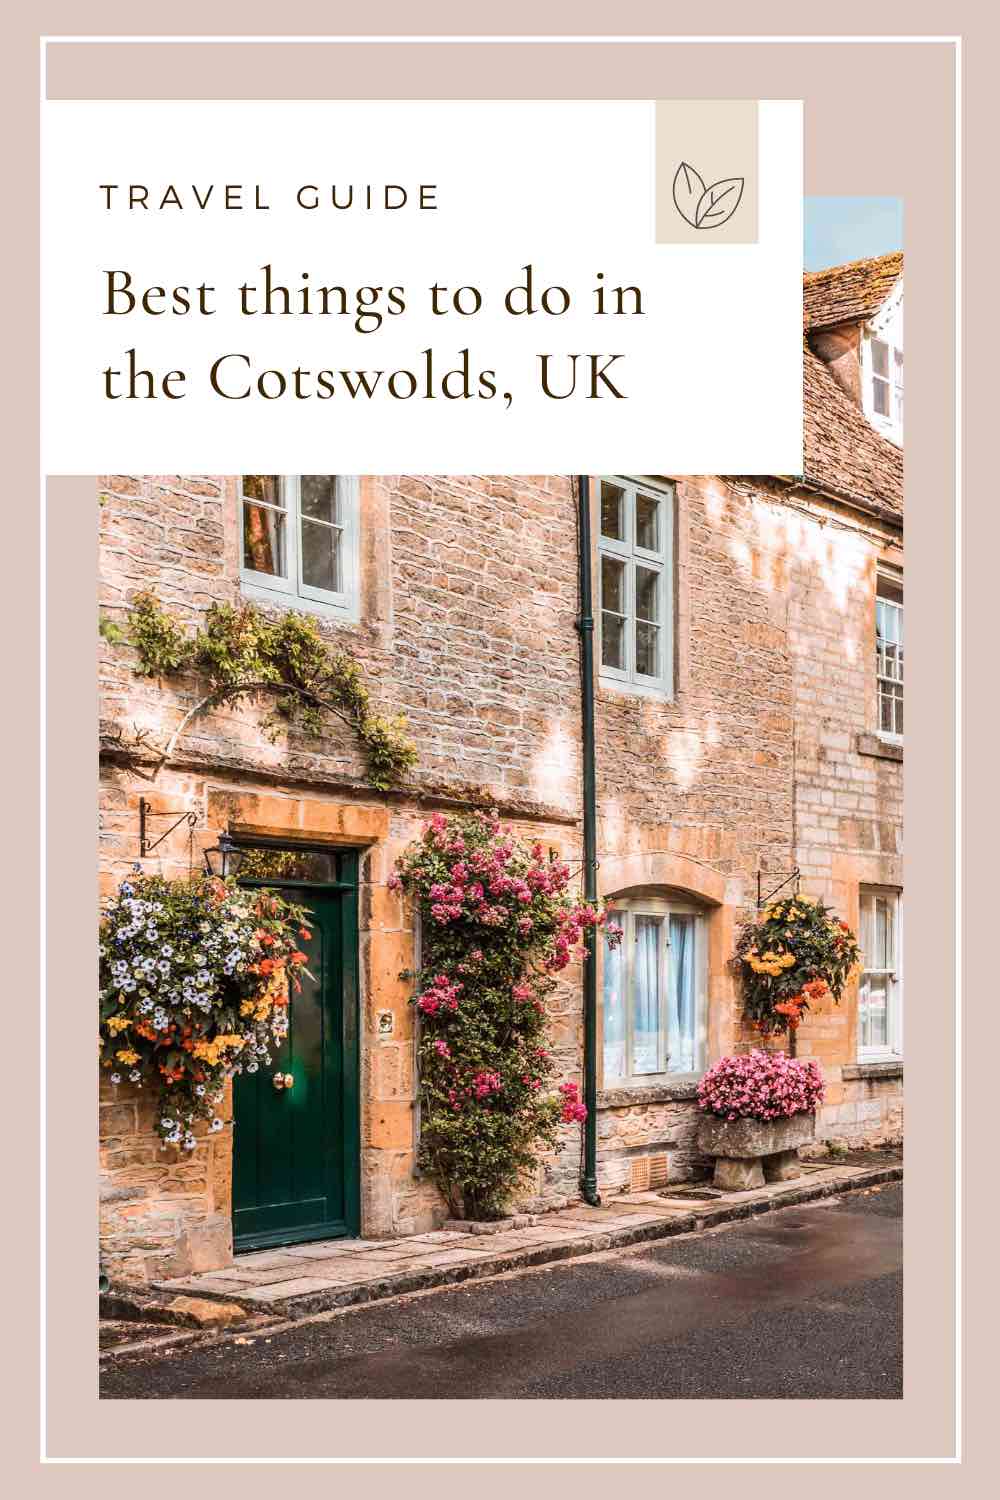 23 best things to do in the Cotswolds